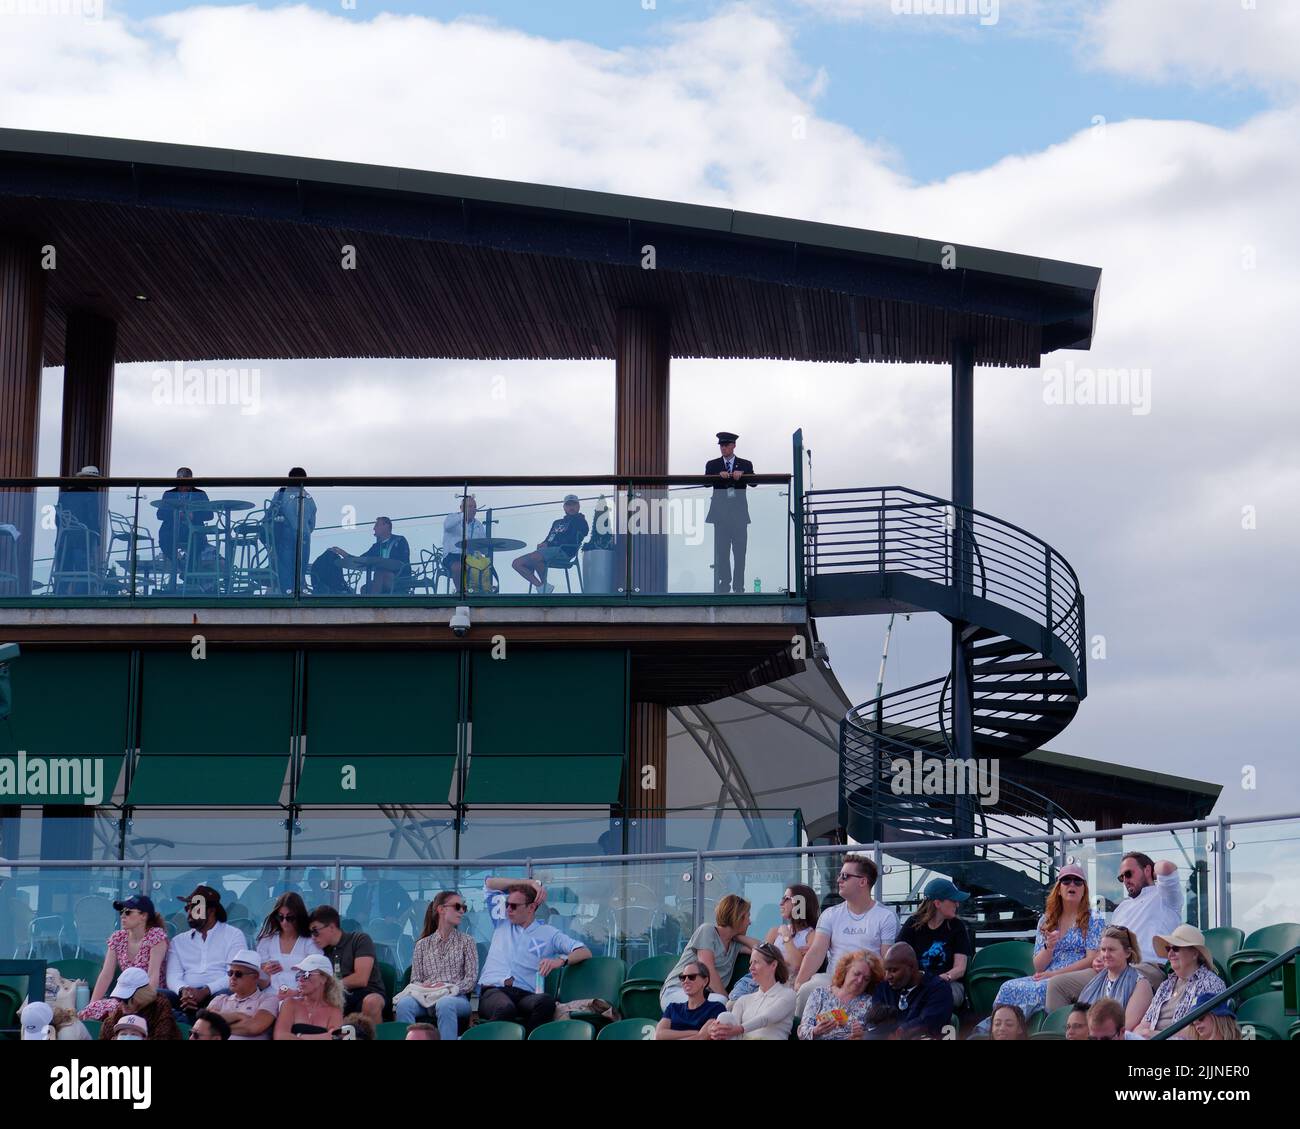 Wimbledon, Greater London, England, July 02 2022: Wimbledon Tennis Championship. Part of the grandstand area of court three including a staircase wher Stock Photo